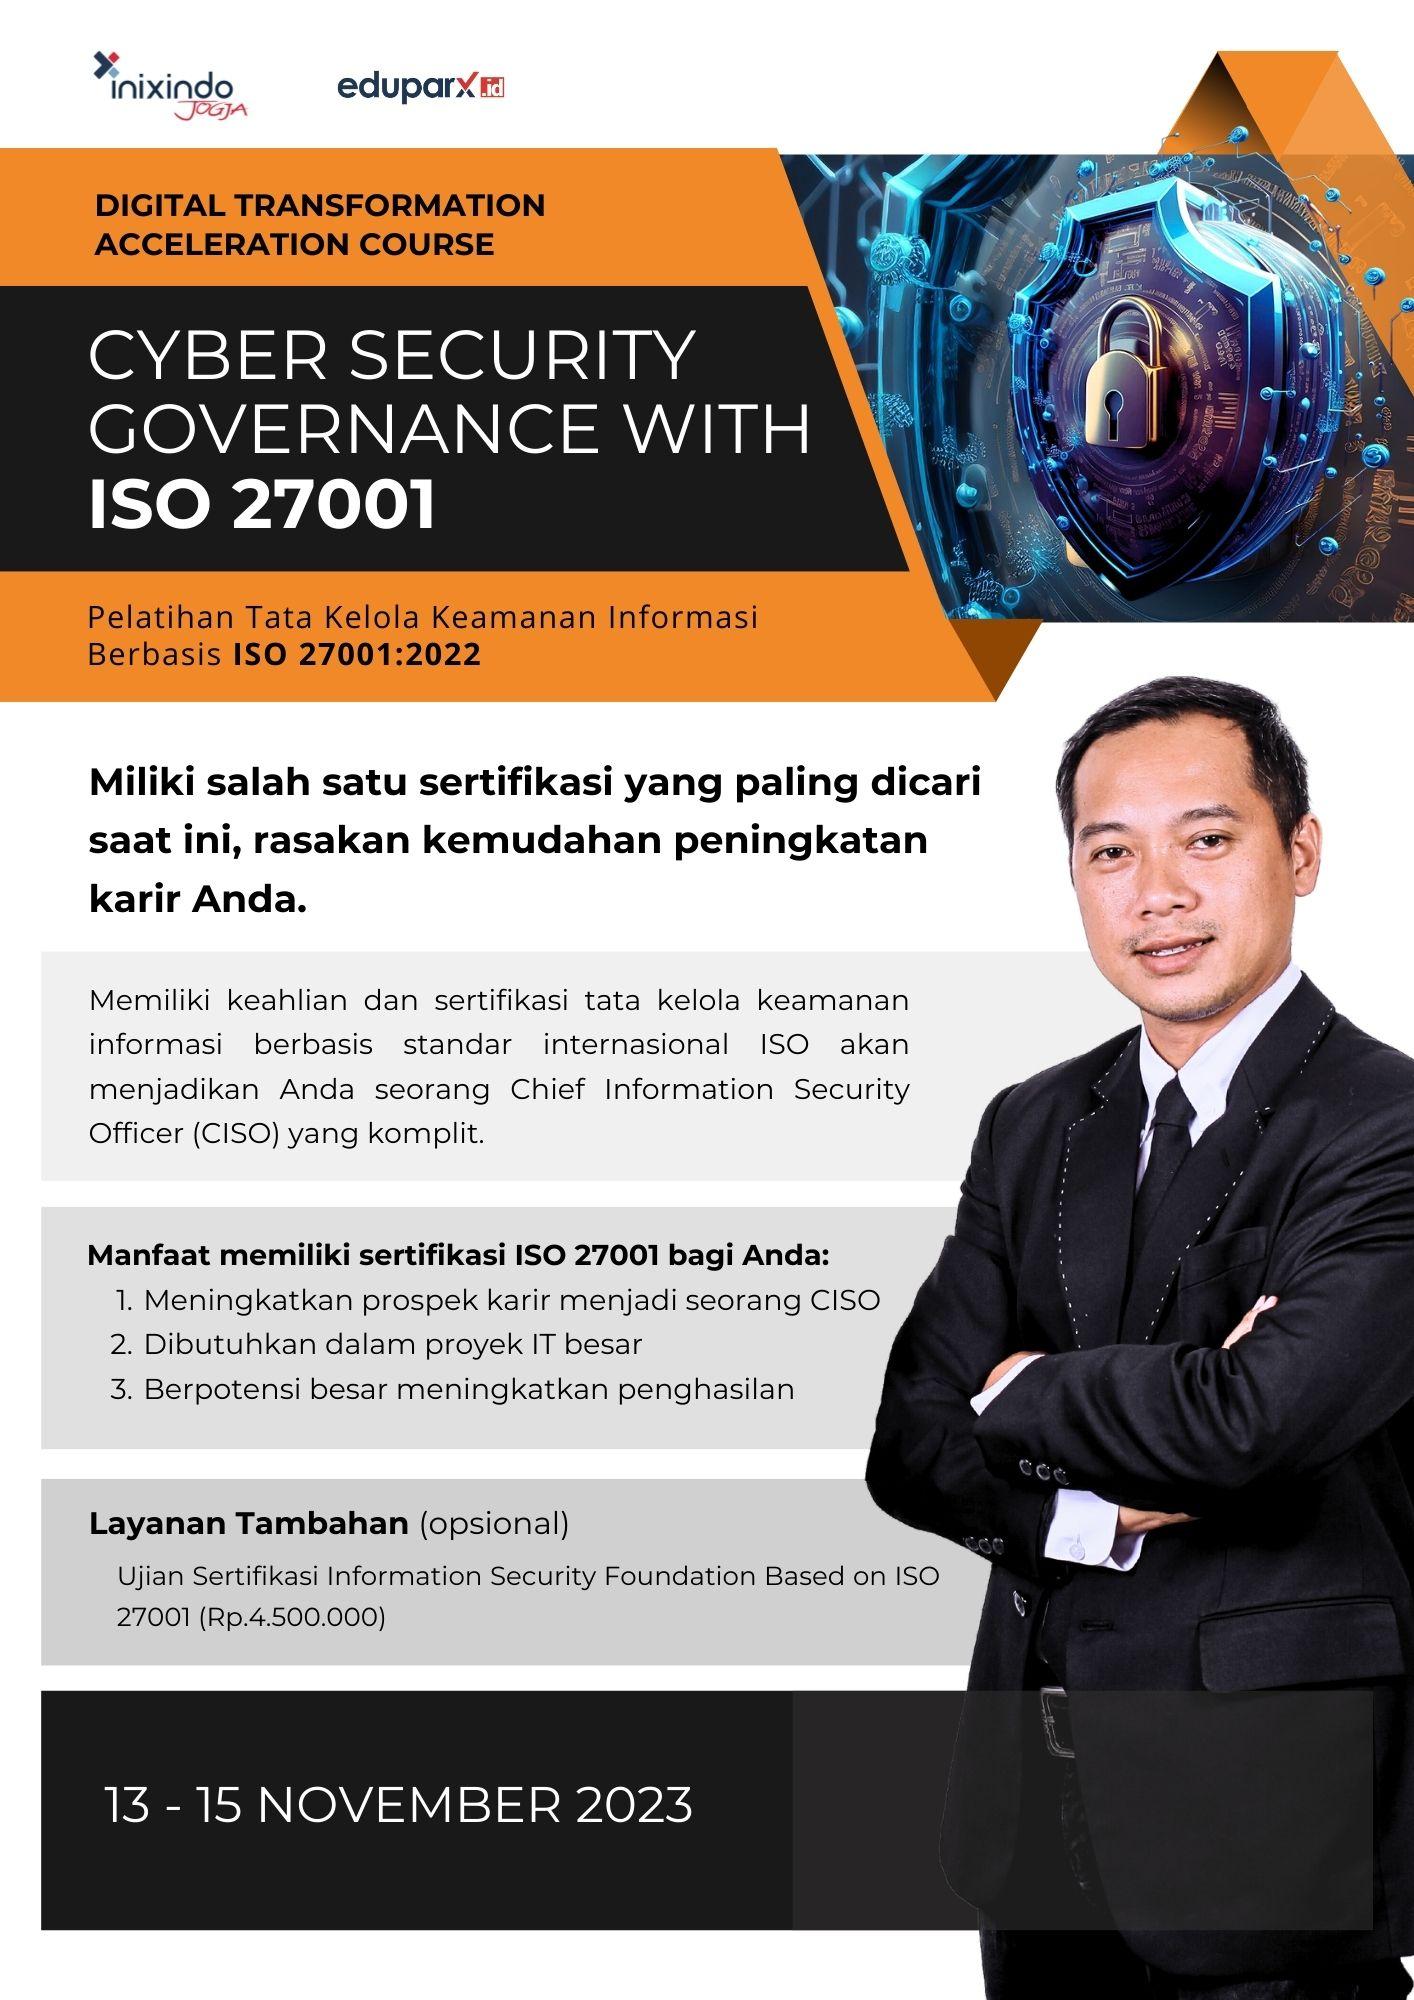 Cyber Security Governance with ISO 27001